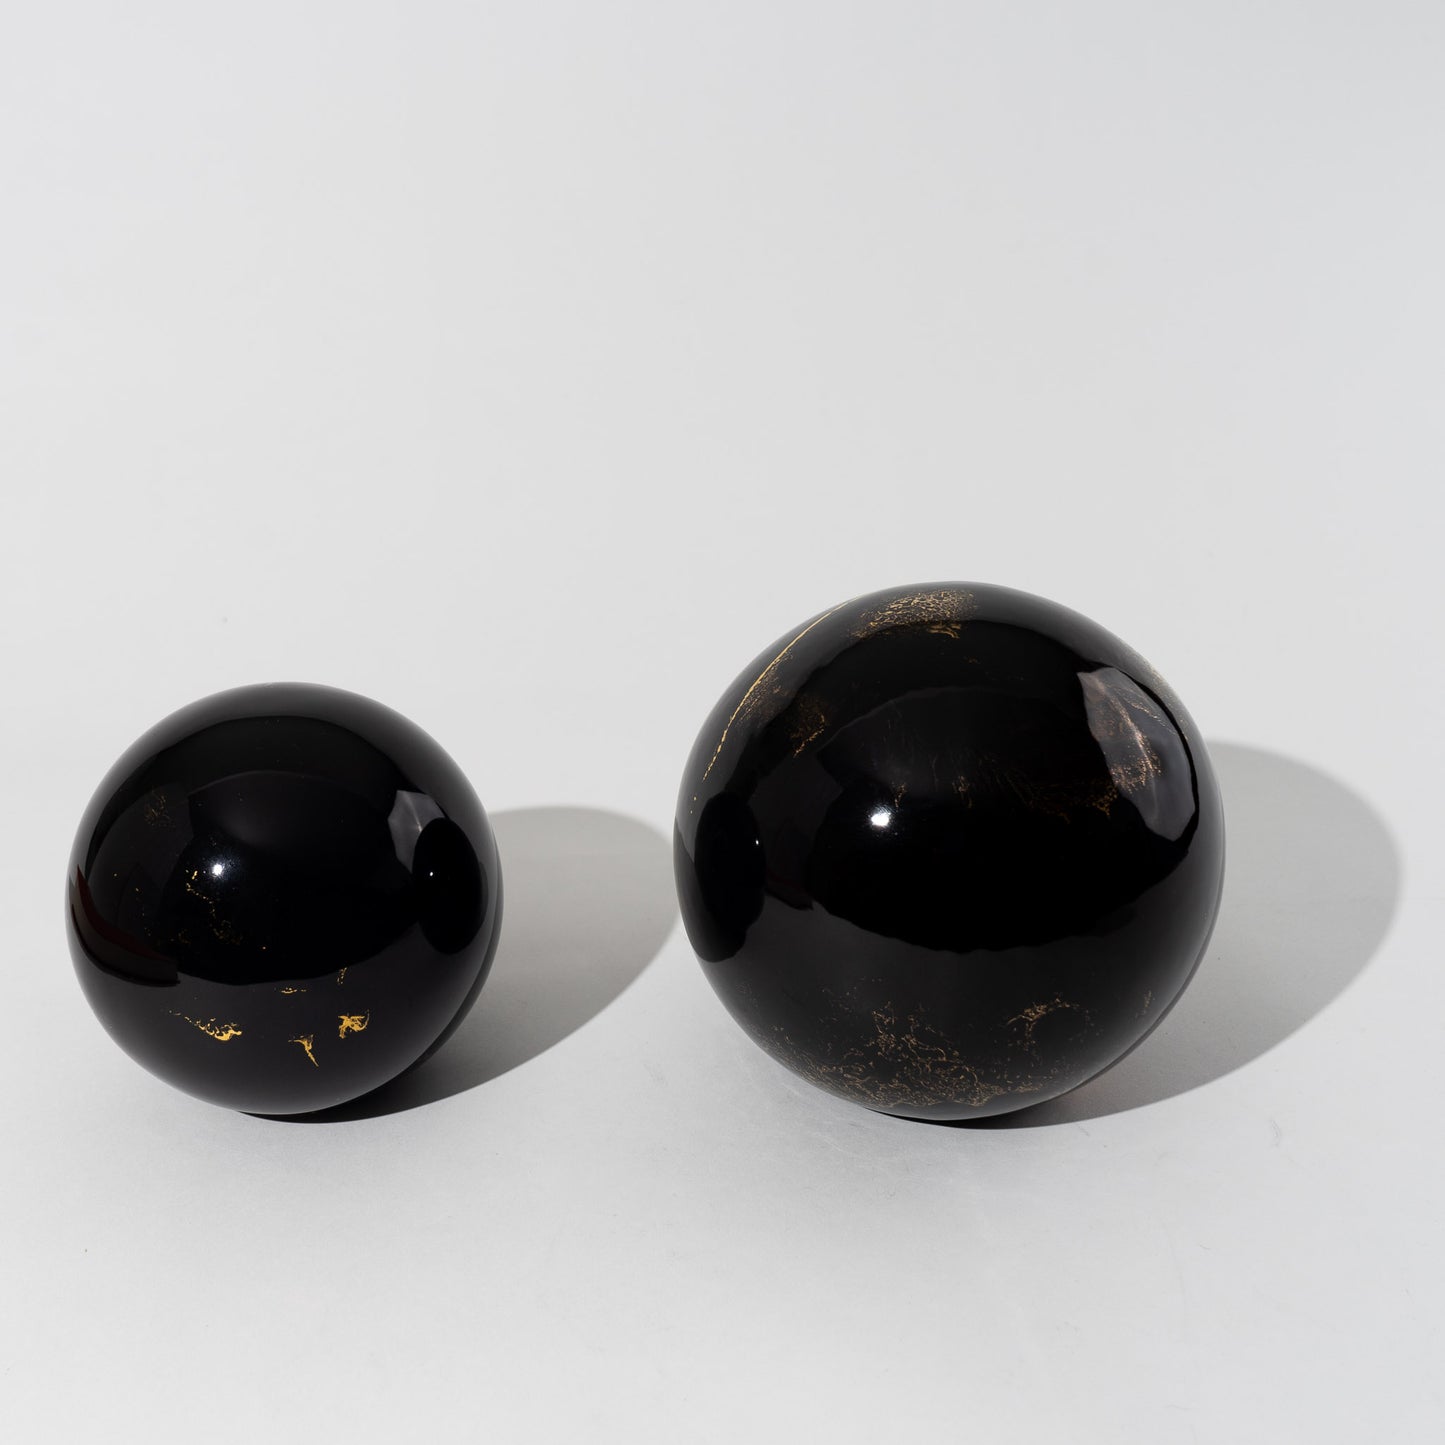 Vintage Black and Gold Ceramic Globes - A Pair